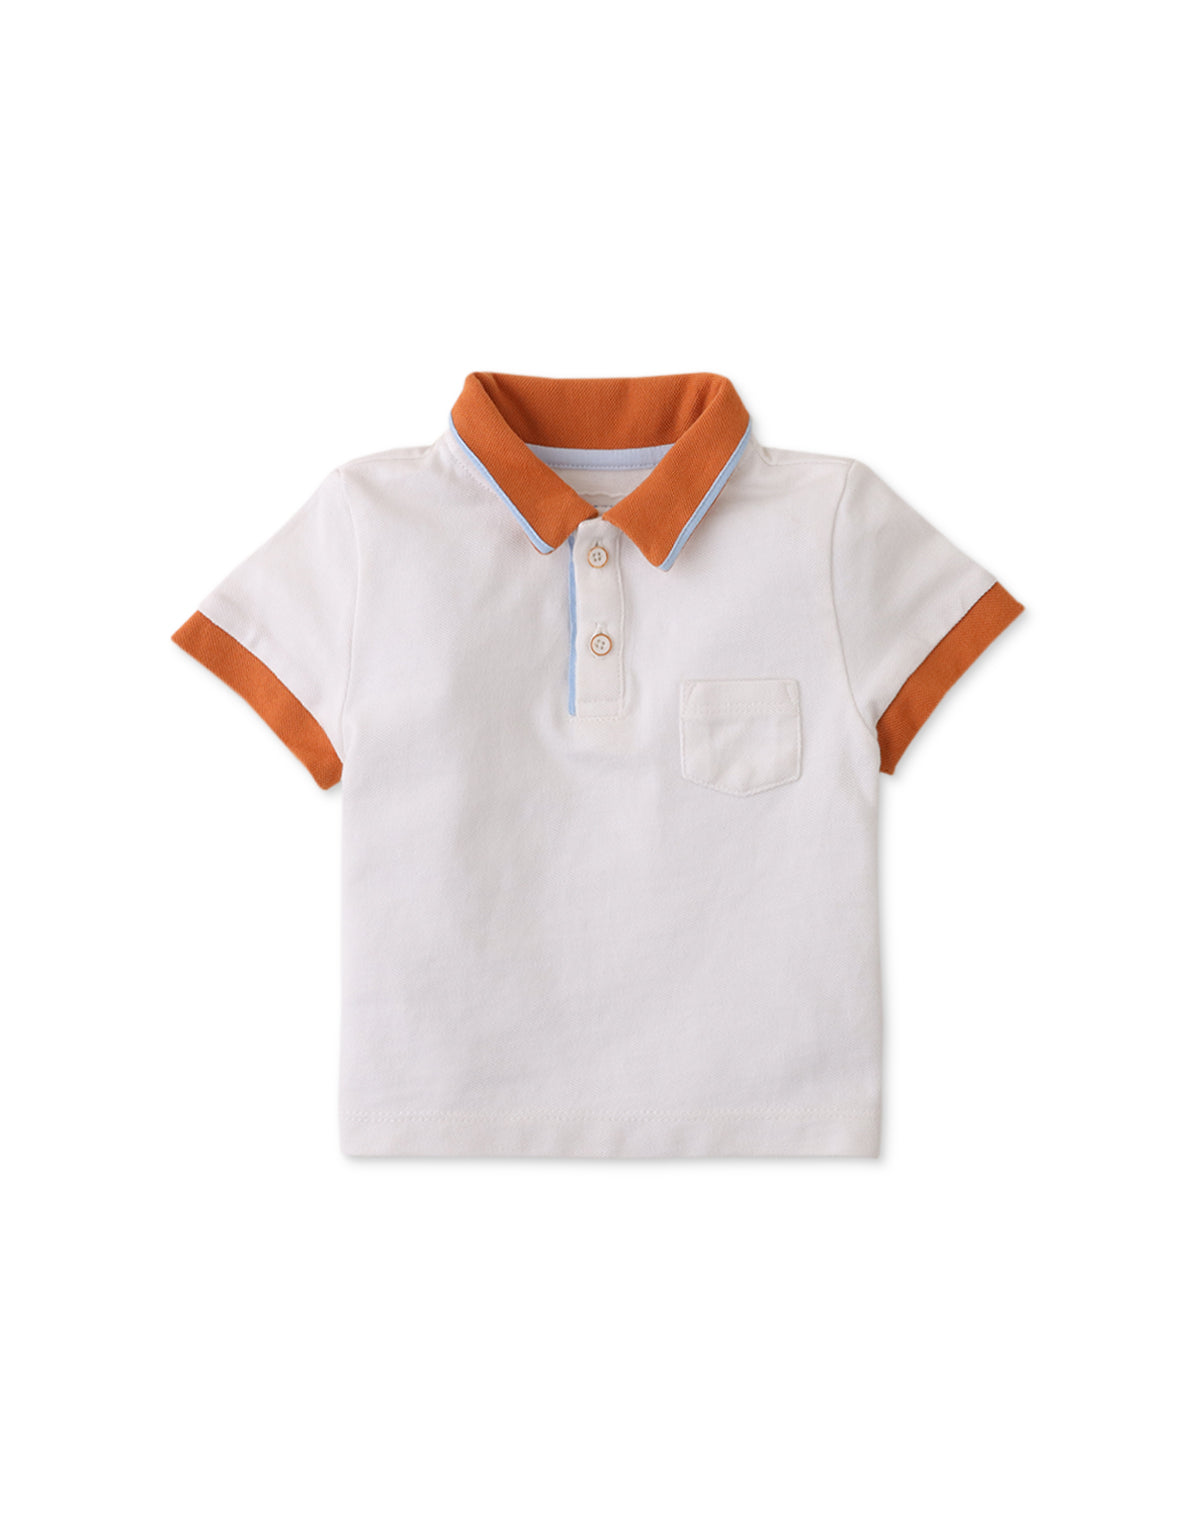 BABY BOYS BABY POLO SHIRT WITH CONTRAST COLLAR